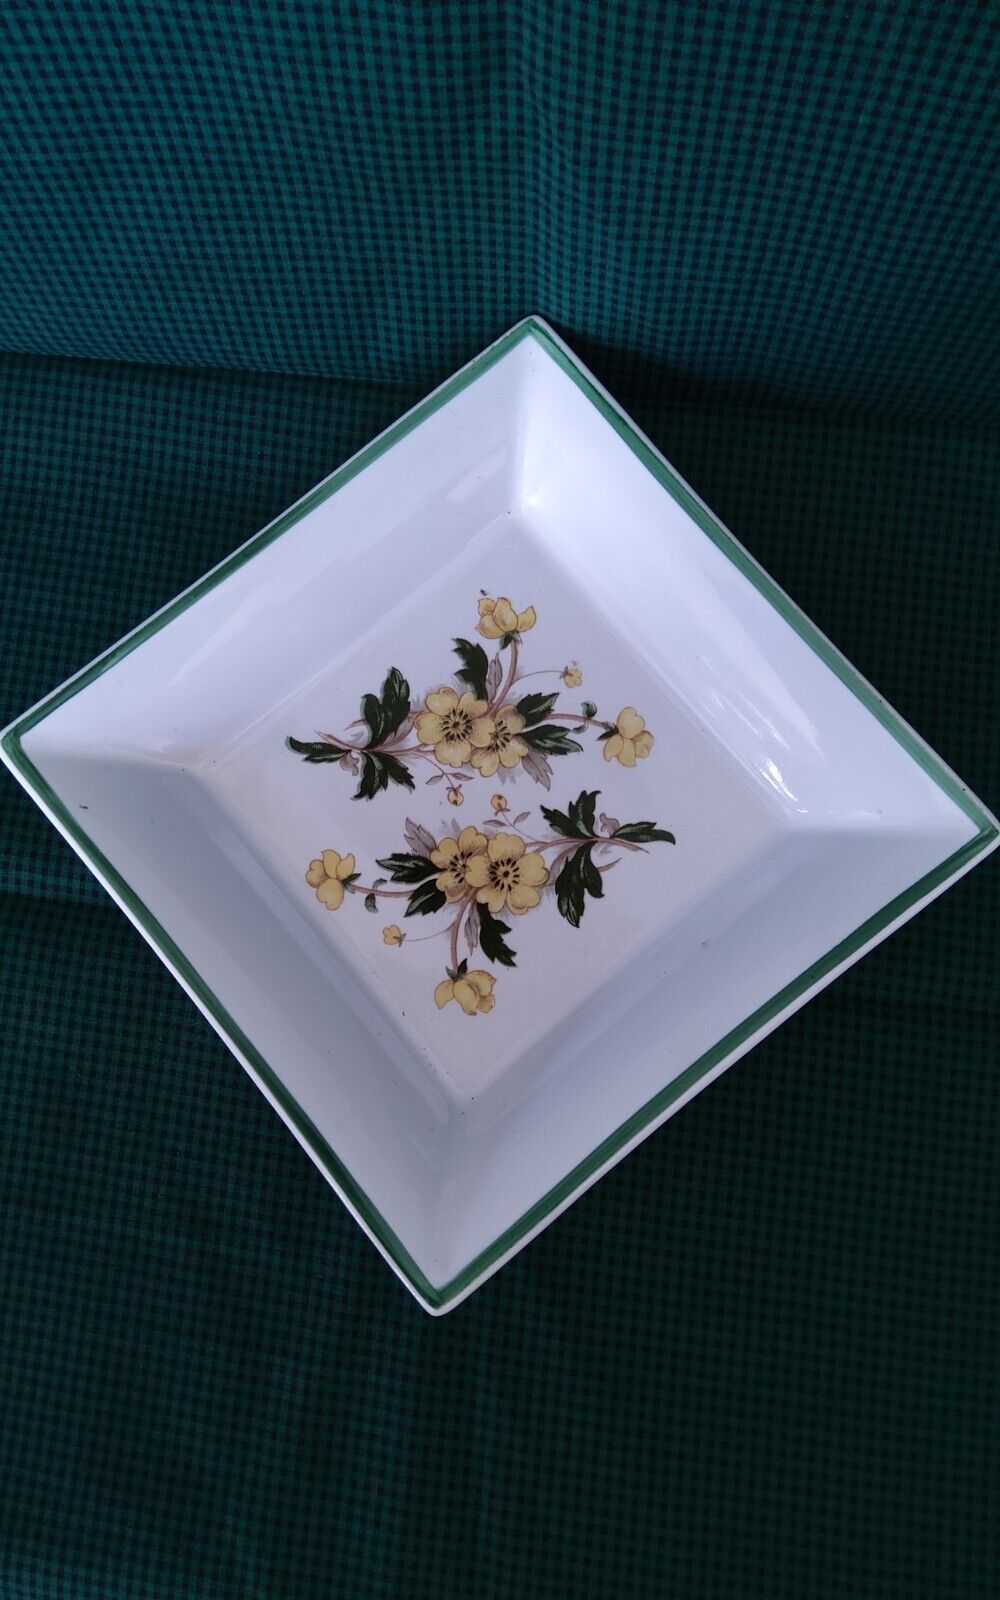 VINTAGE YELLOW FLOWERS TRINKET OR SERVING DISH 6 1/2 X 6 1/2 INCHES, 1 1/4...